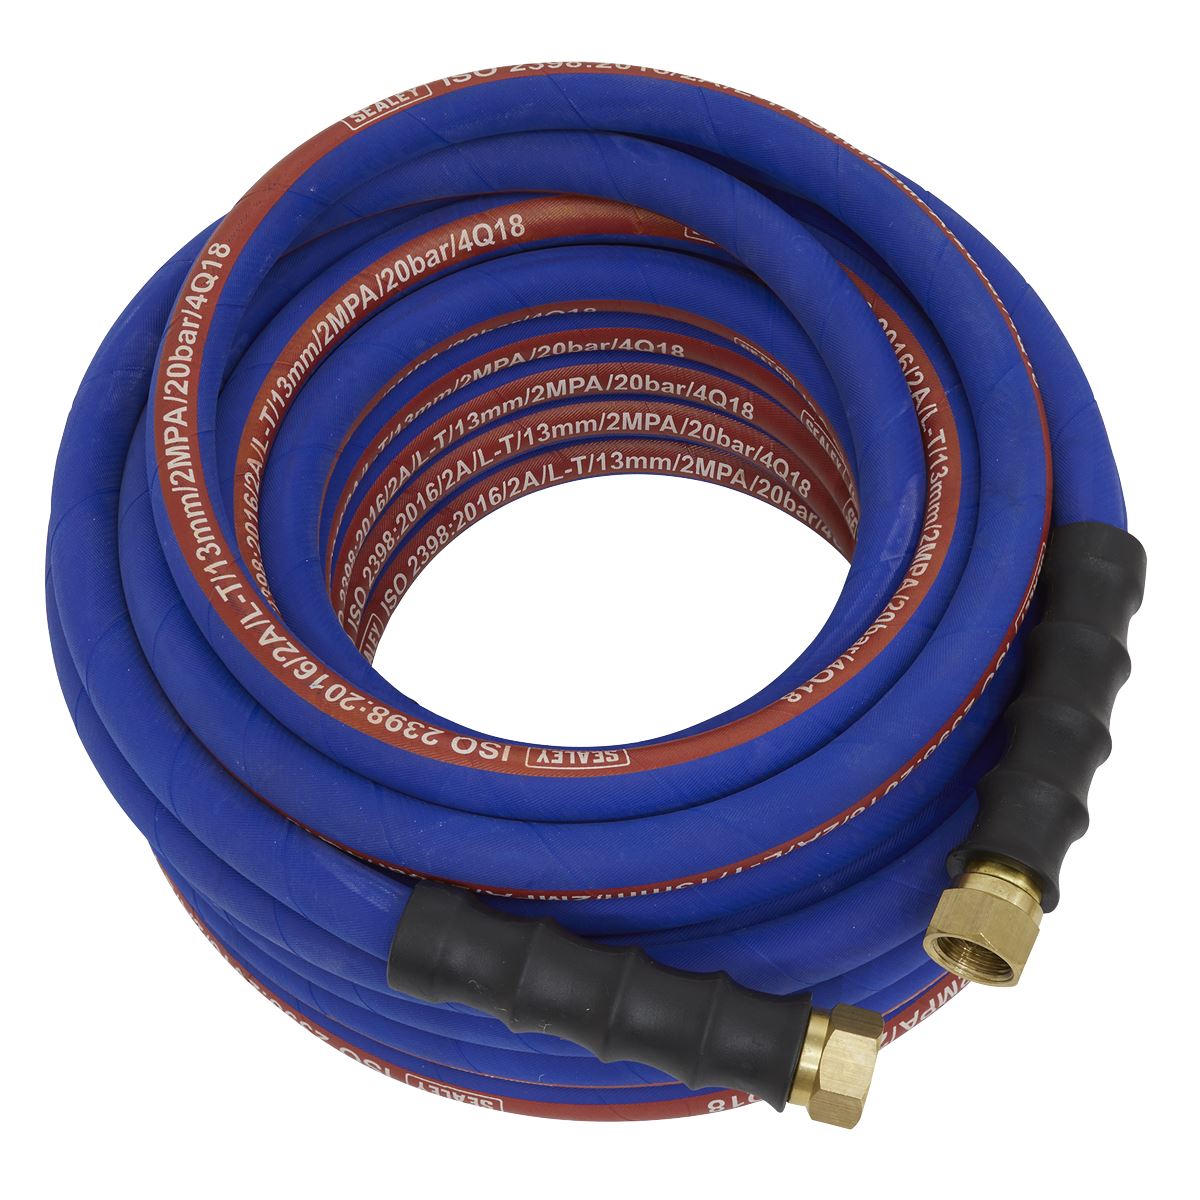 Sealey Air Hose 15m x Ø13mm with 1/2"BSP Unions Extra-Heavy-Duty